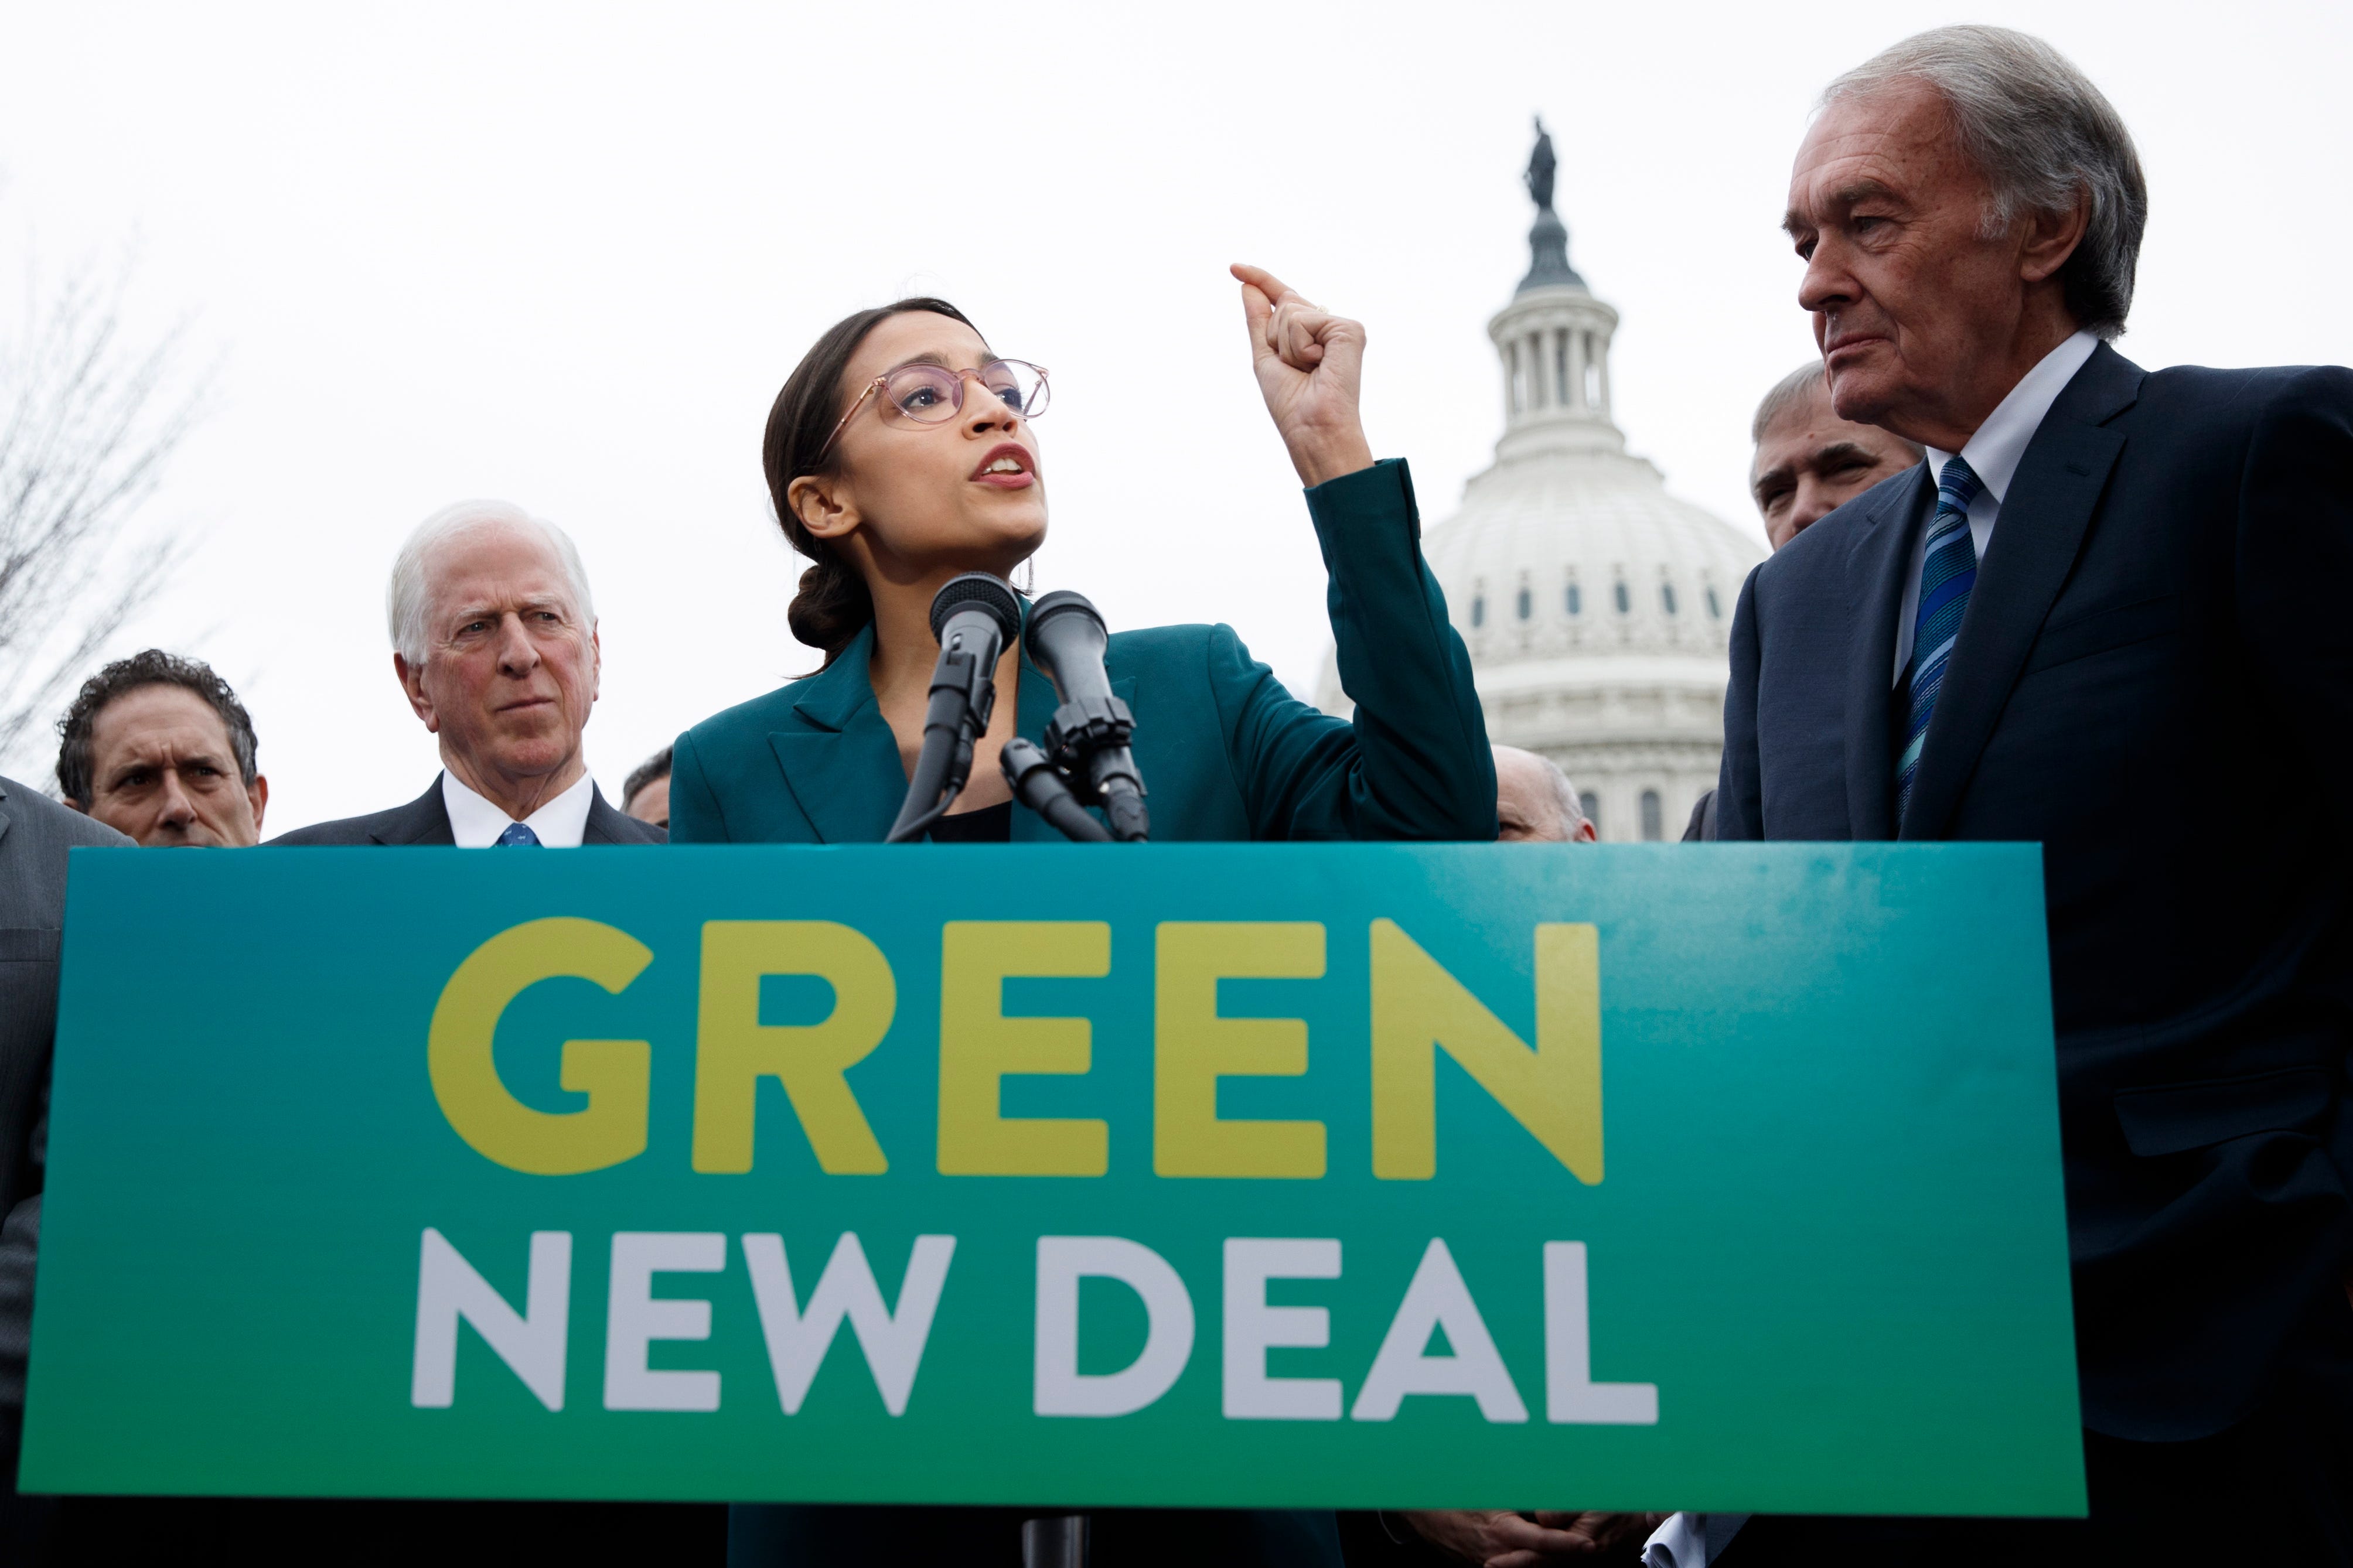 Green New Deal Not all Democrats on board with ambitious climate plan